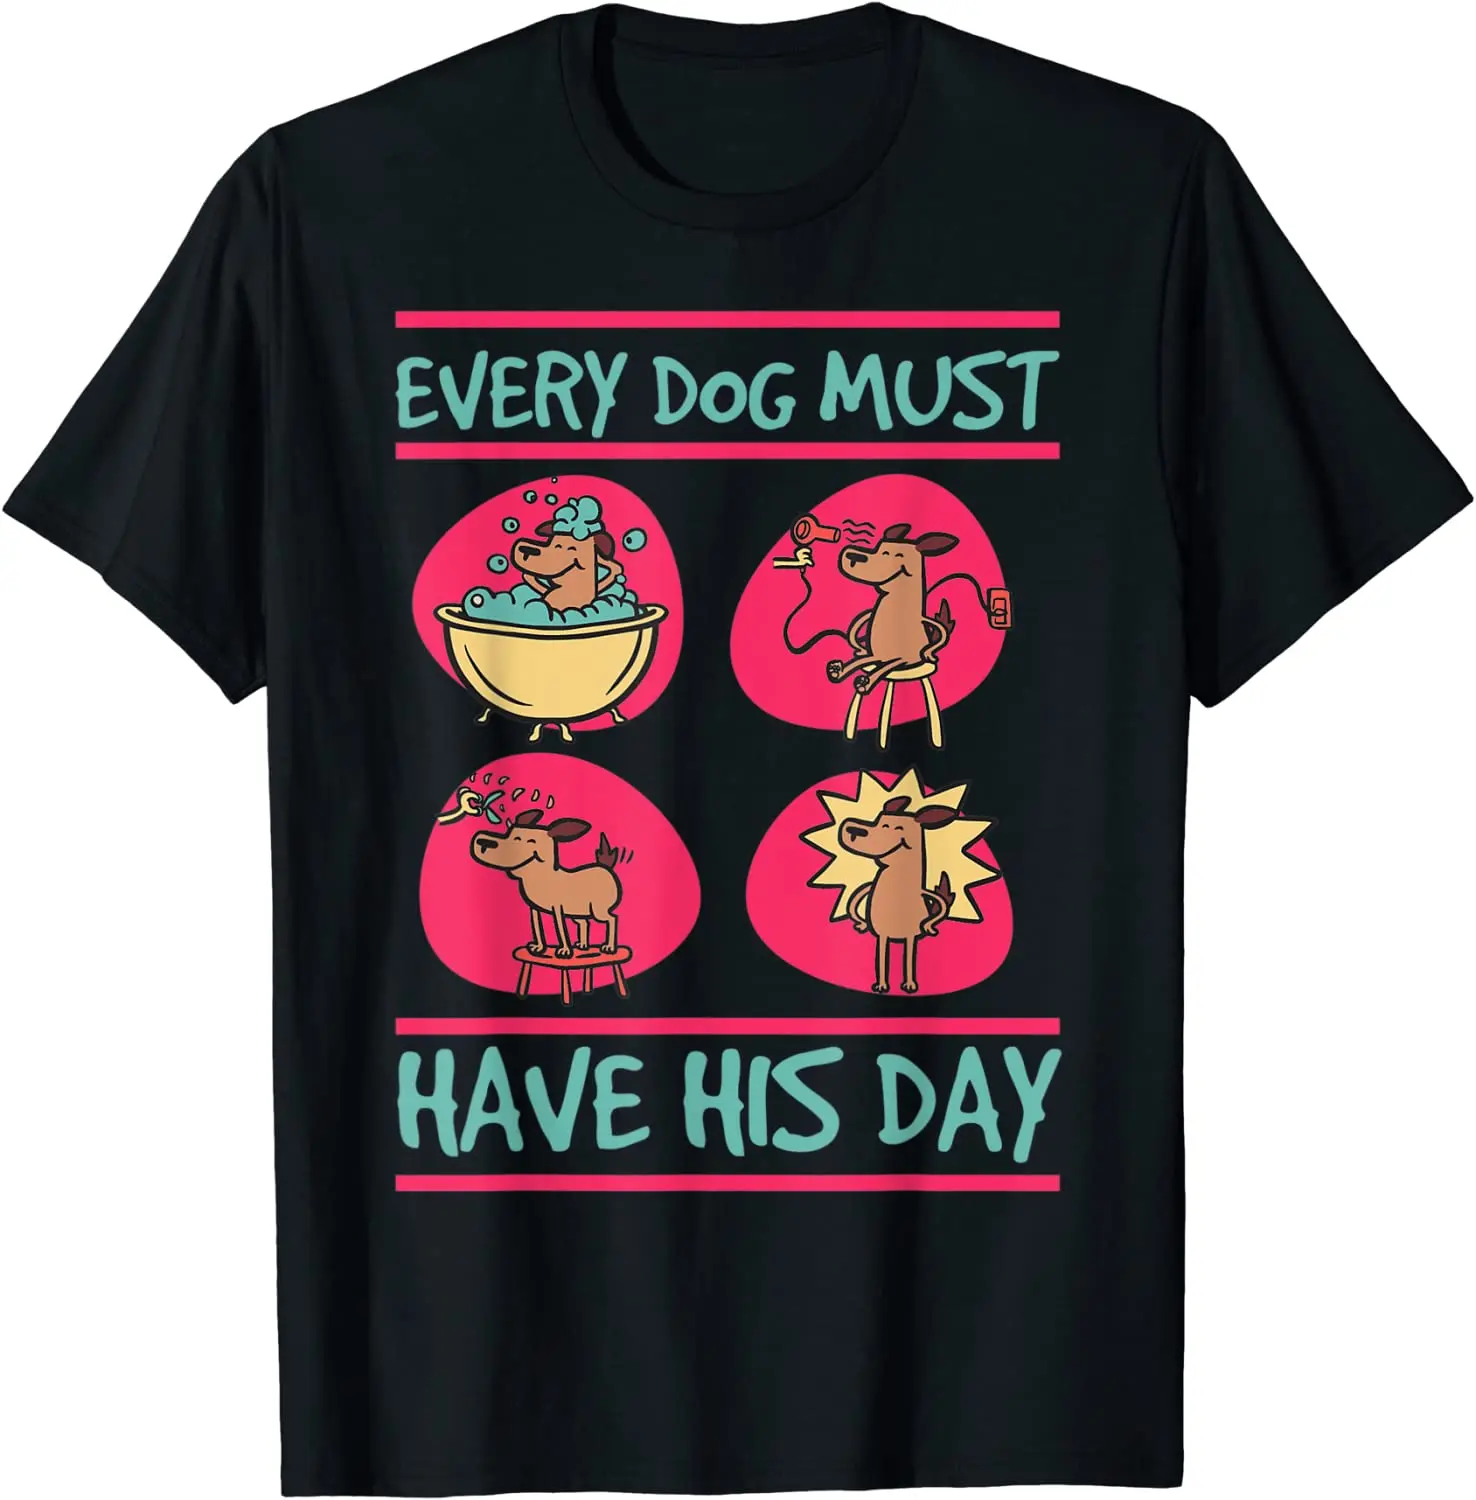 

Dog's Pamper Day Relaxed Puppy Loved Cleaned Dog T-Shirt Every Dog Must Have His Day Men Clothing Cotton Casual Four Seasons